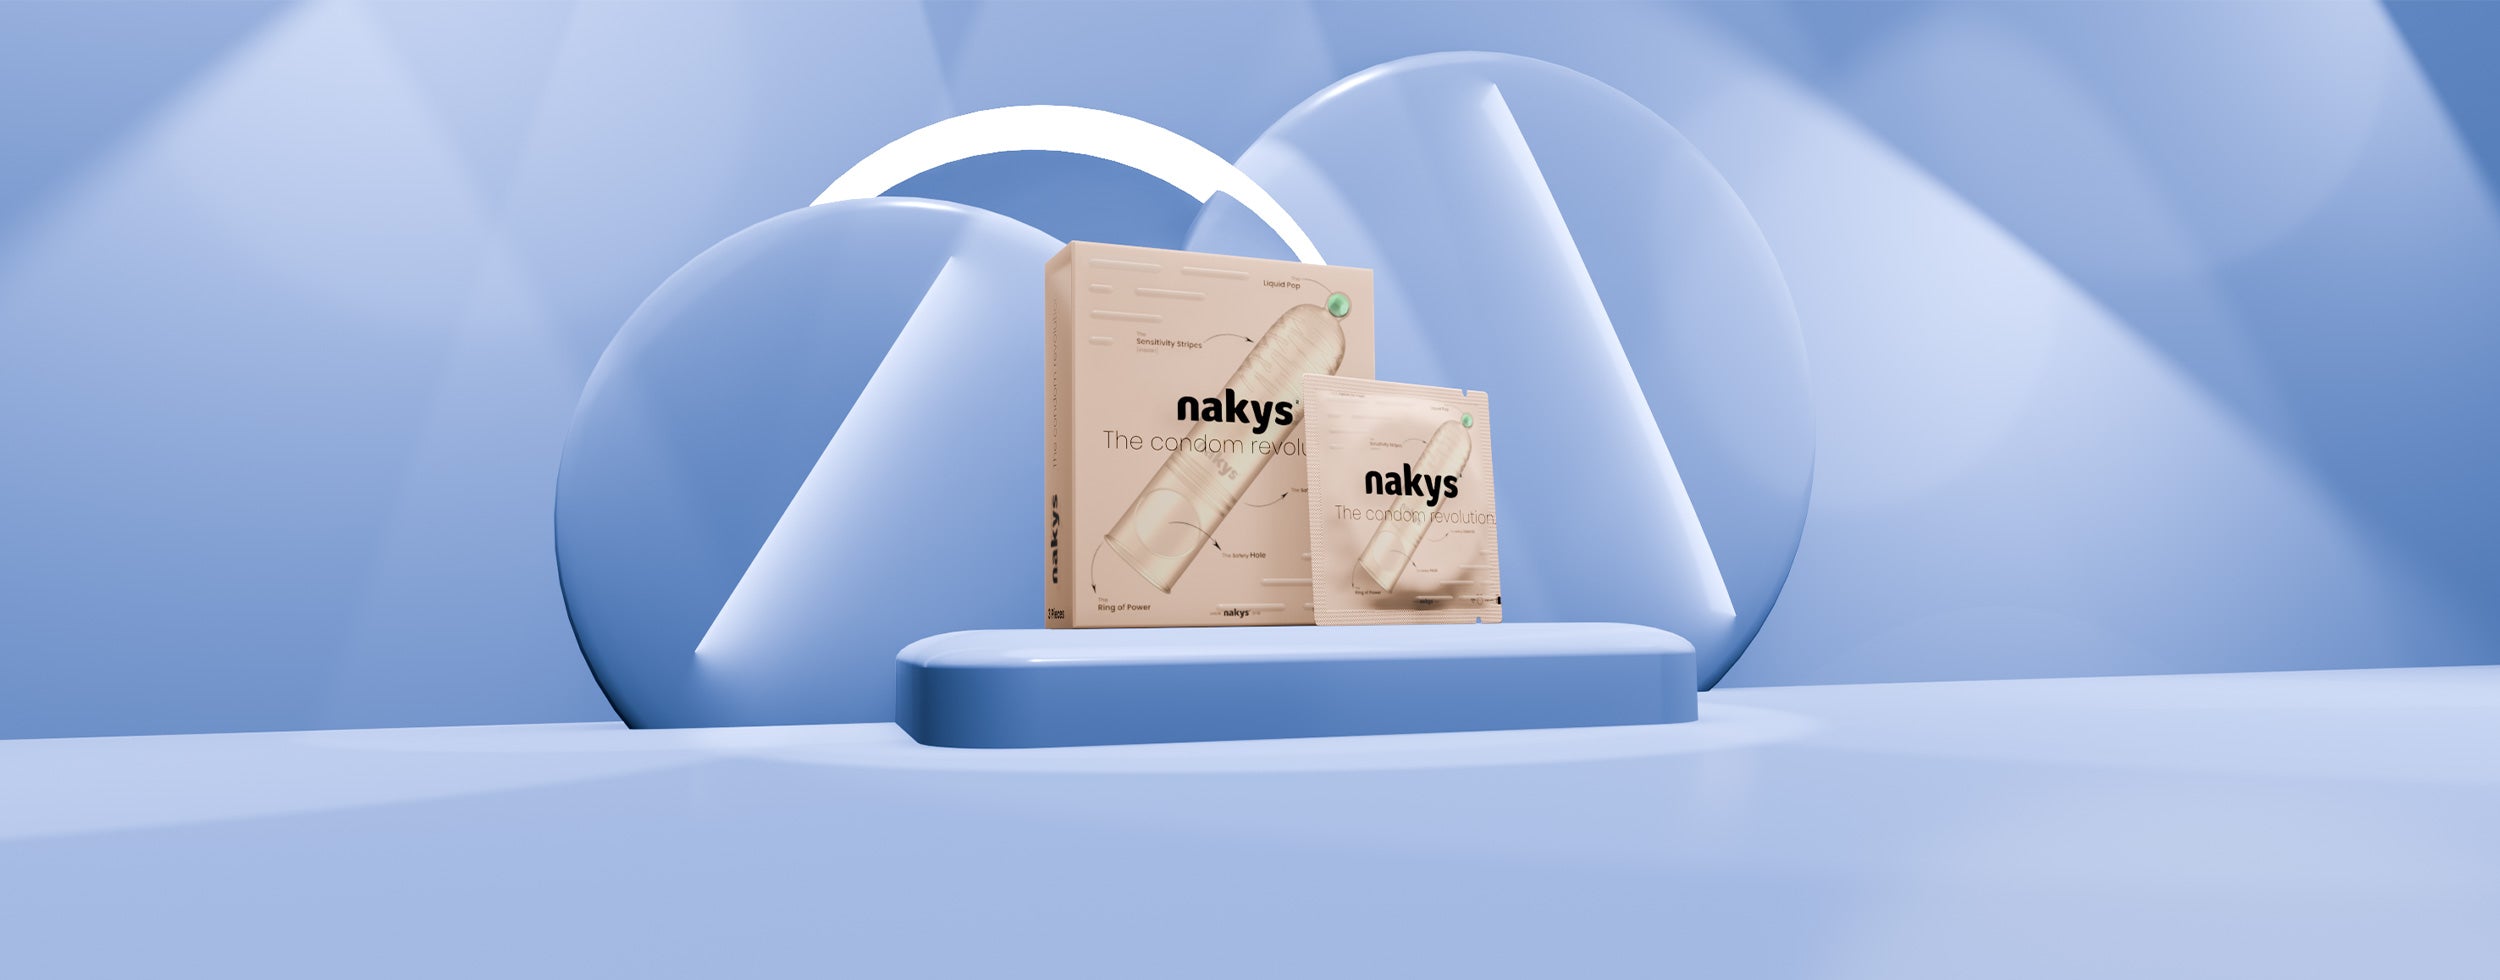 NAKYS-Moods-240221-QUER-1